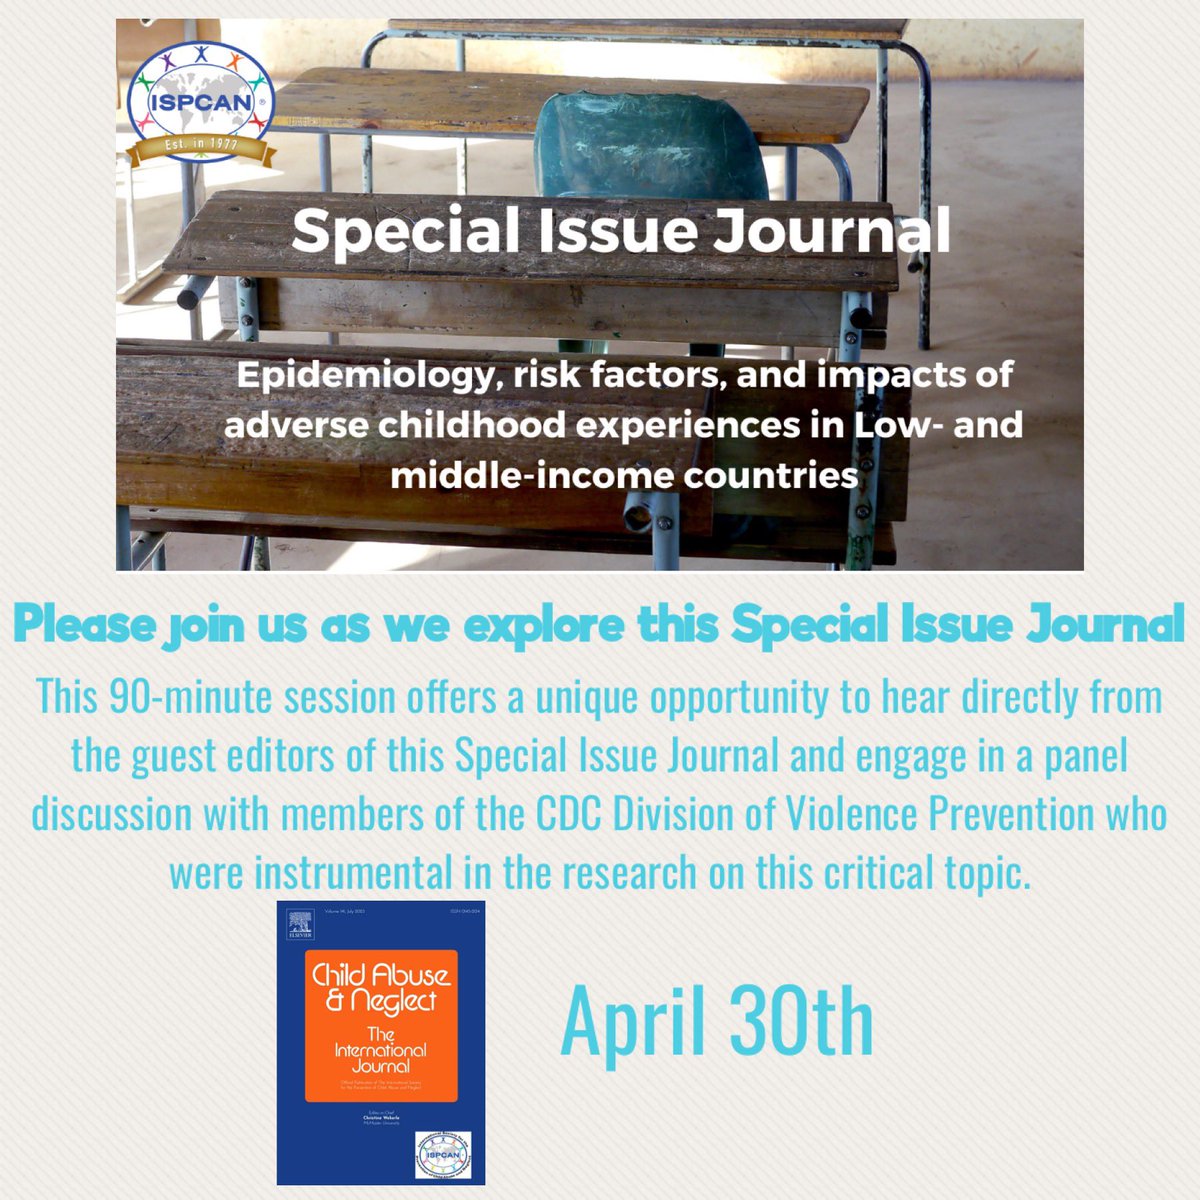 Tomorrow! ISPCAN Webinar, Special Issue, The International Journal of Child Abuse & Neglect, “Epidemiology, risk factors, and impacts of adverse childhood experiences in low and middle income countries.” April 30th, 10:00 am – 11:30 am EDT. Learn more and register here: